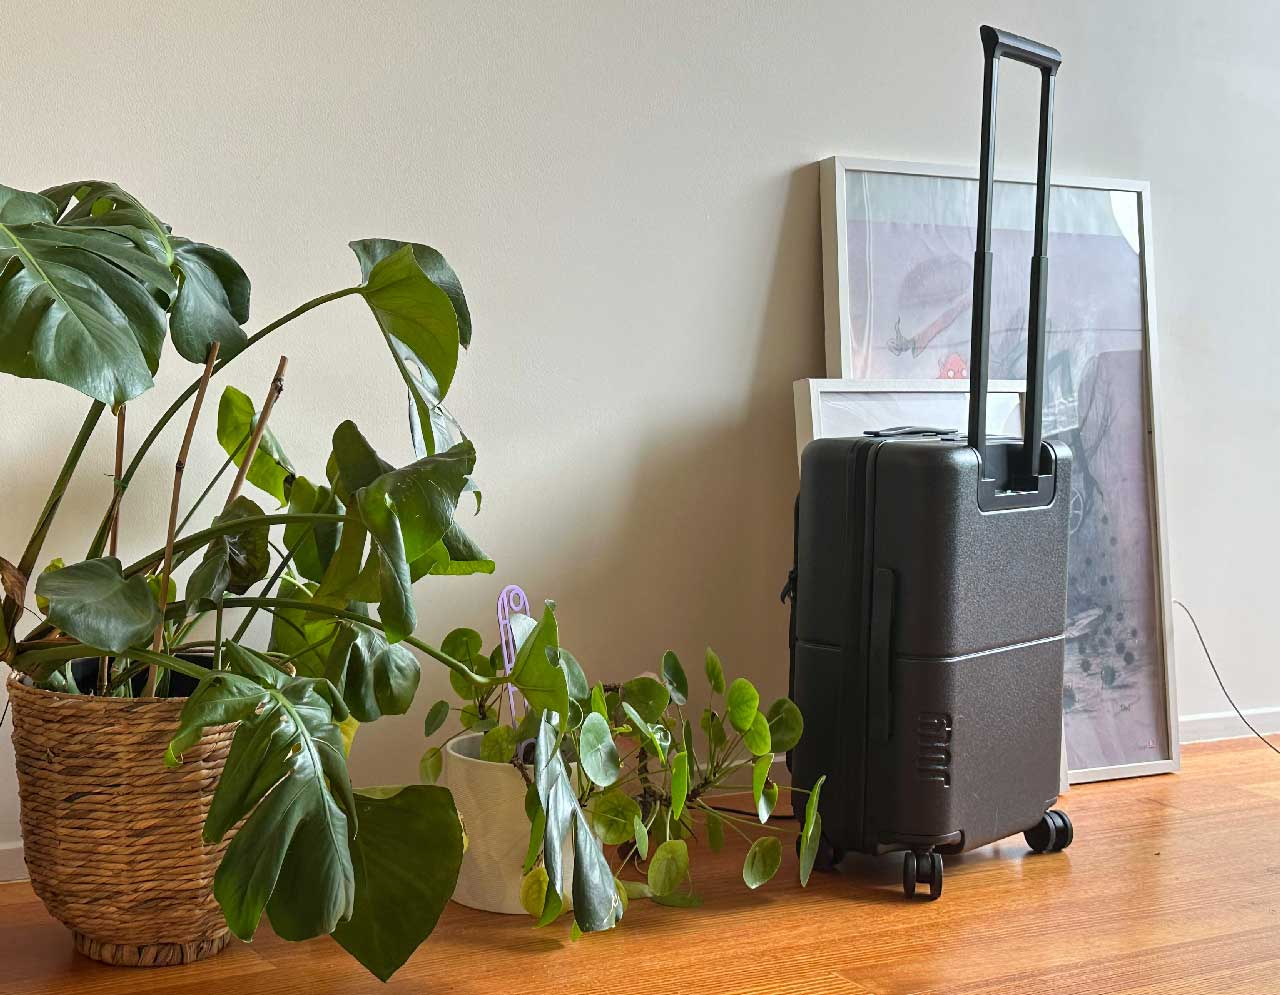 July Carry-on Pro in my living room